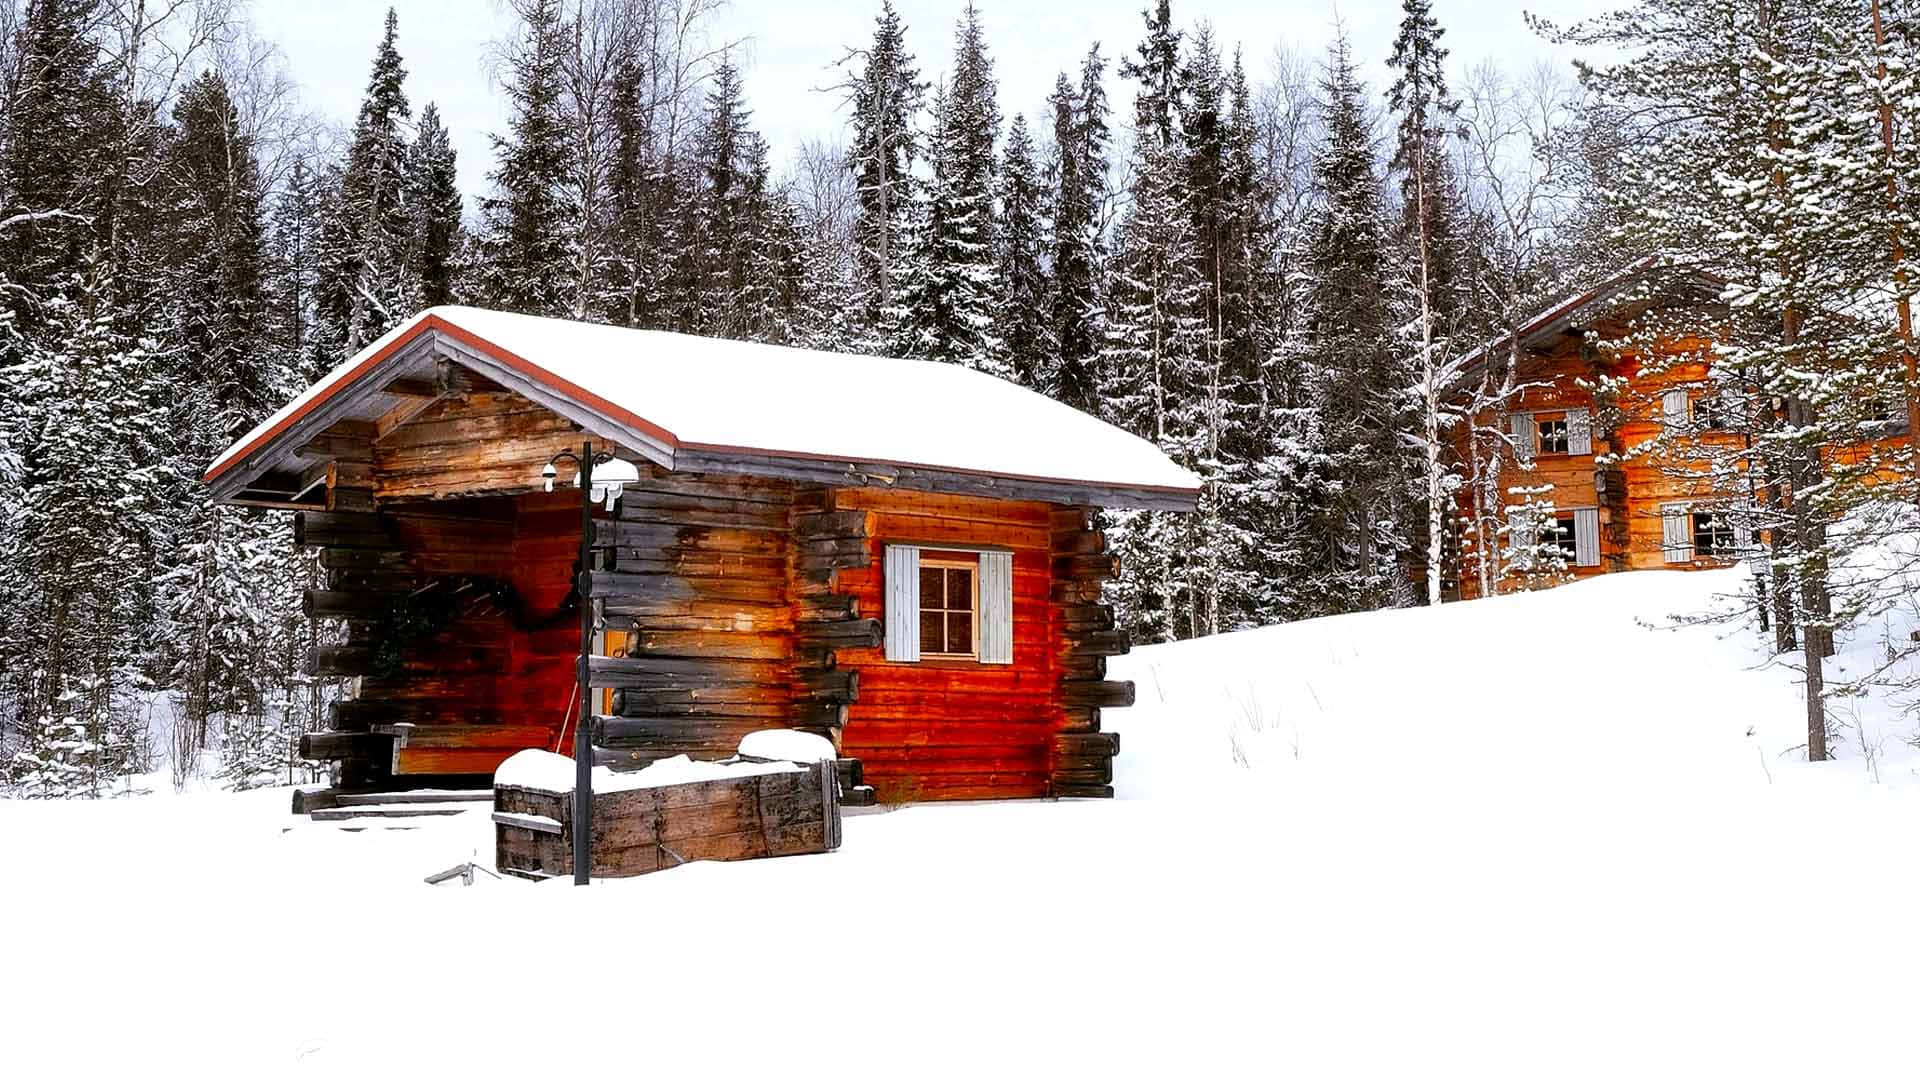 A peaceful snowy retreat at a cozy winter cabin nestled in the forest Wallpaper